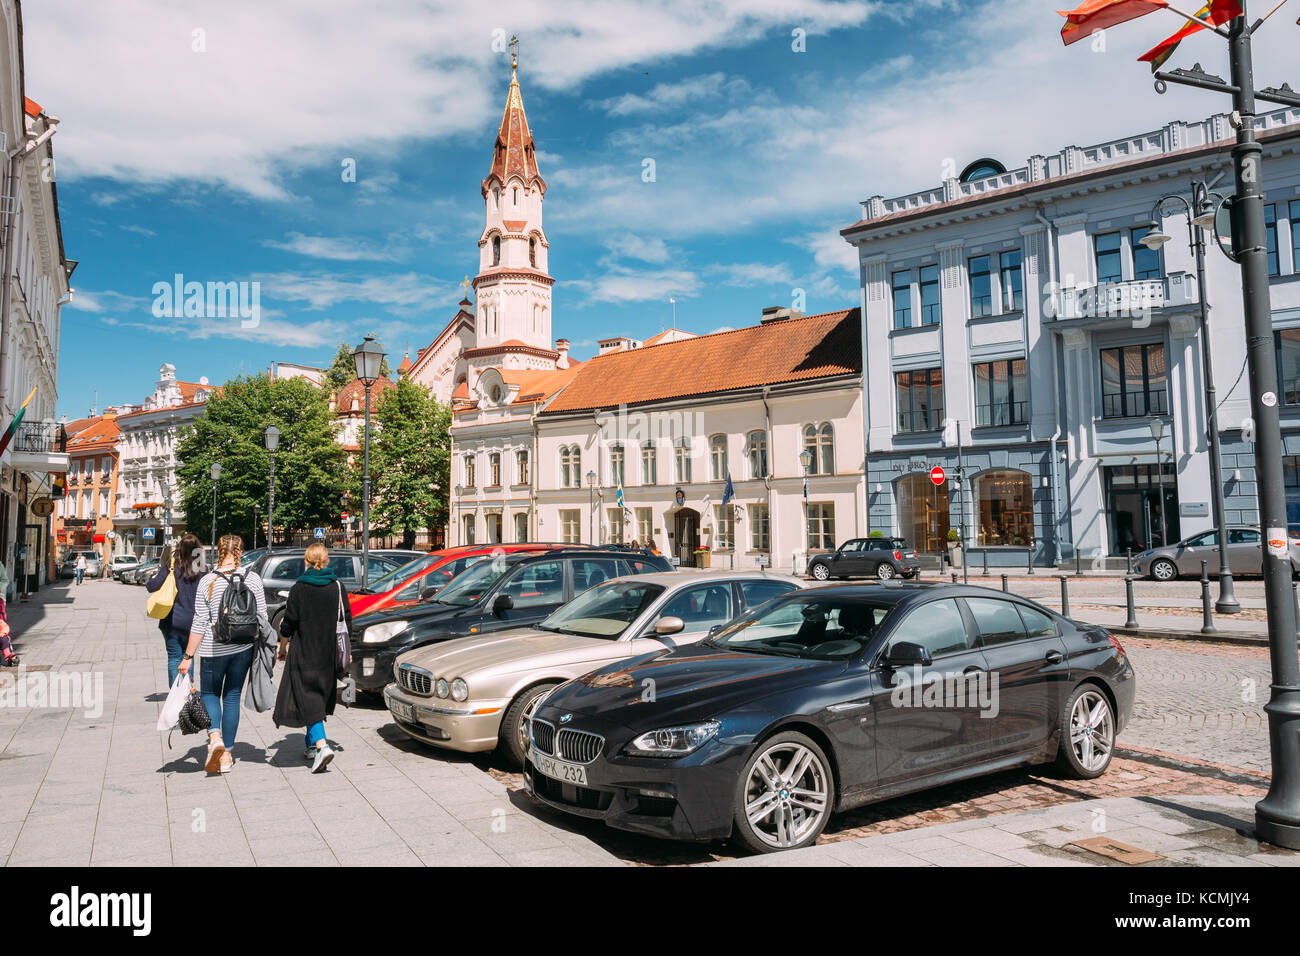 Vilnius, Lithuania - July 5, 2016: Young Women People Walking In Rotuses Street In Old Town. Parked Luxury Cars And St. Nicholas Church In Sunny Summe Stock Photo